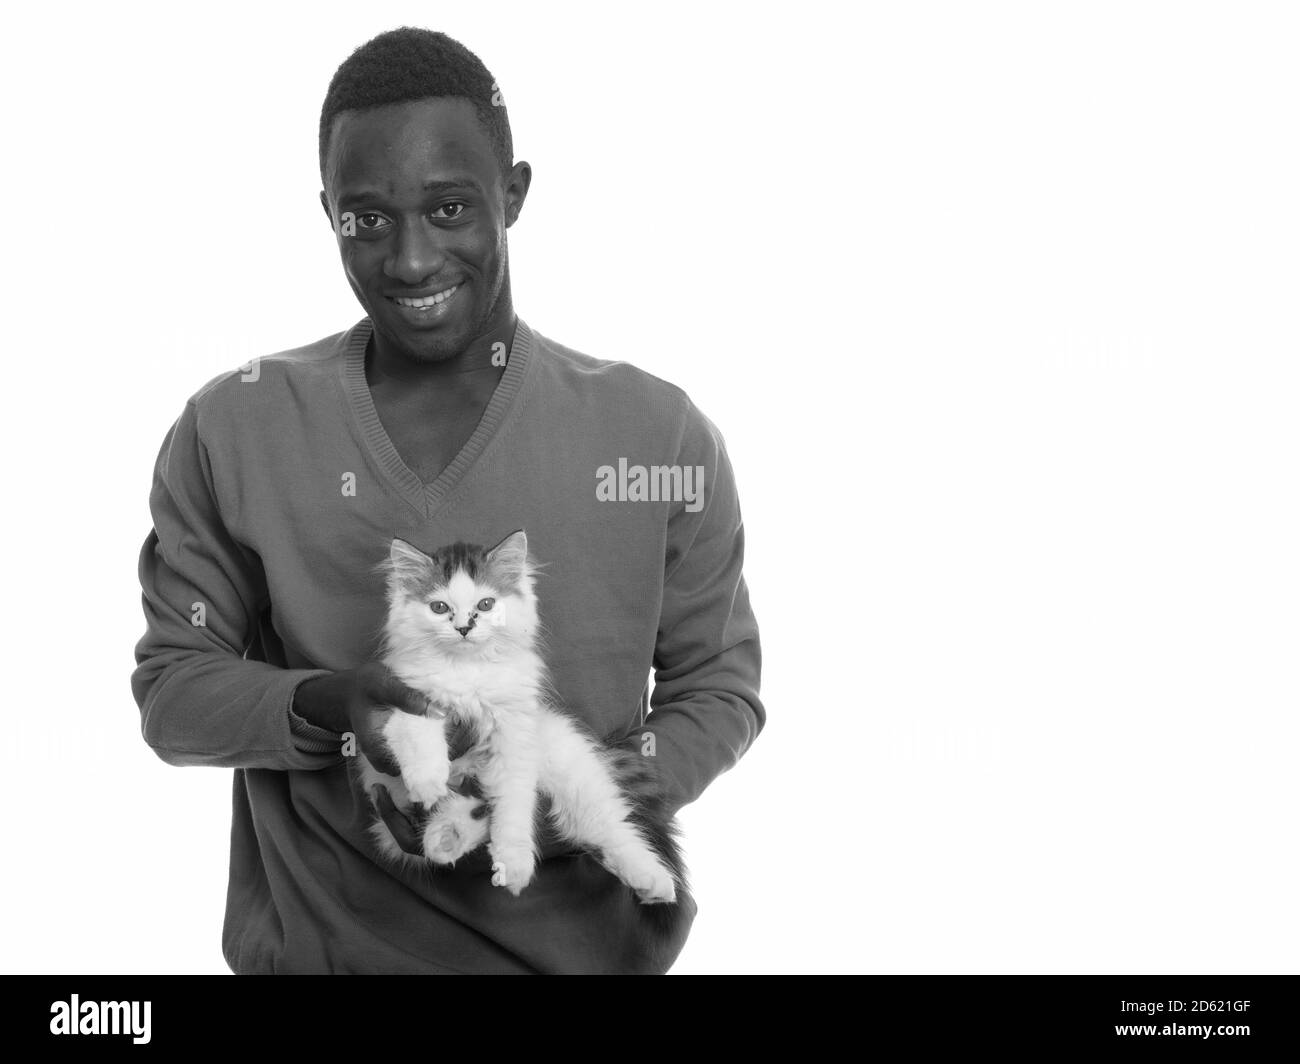 Young happy African man smiling and holding cute cat Stock Photo